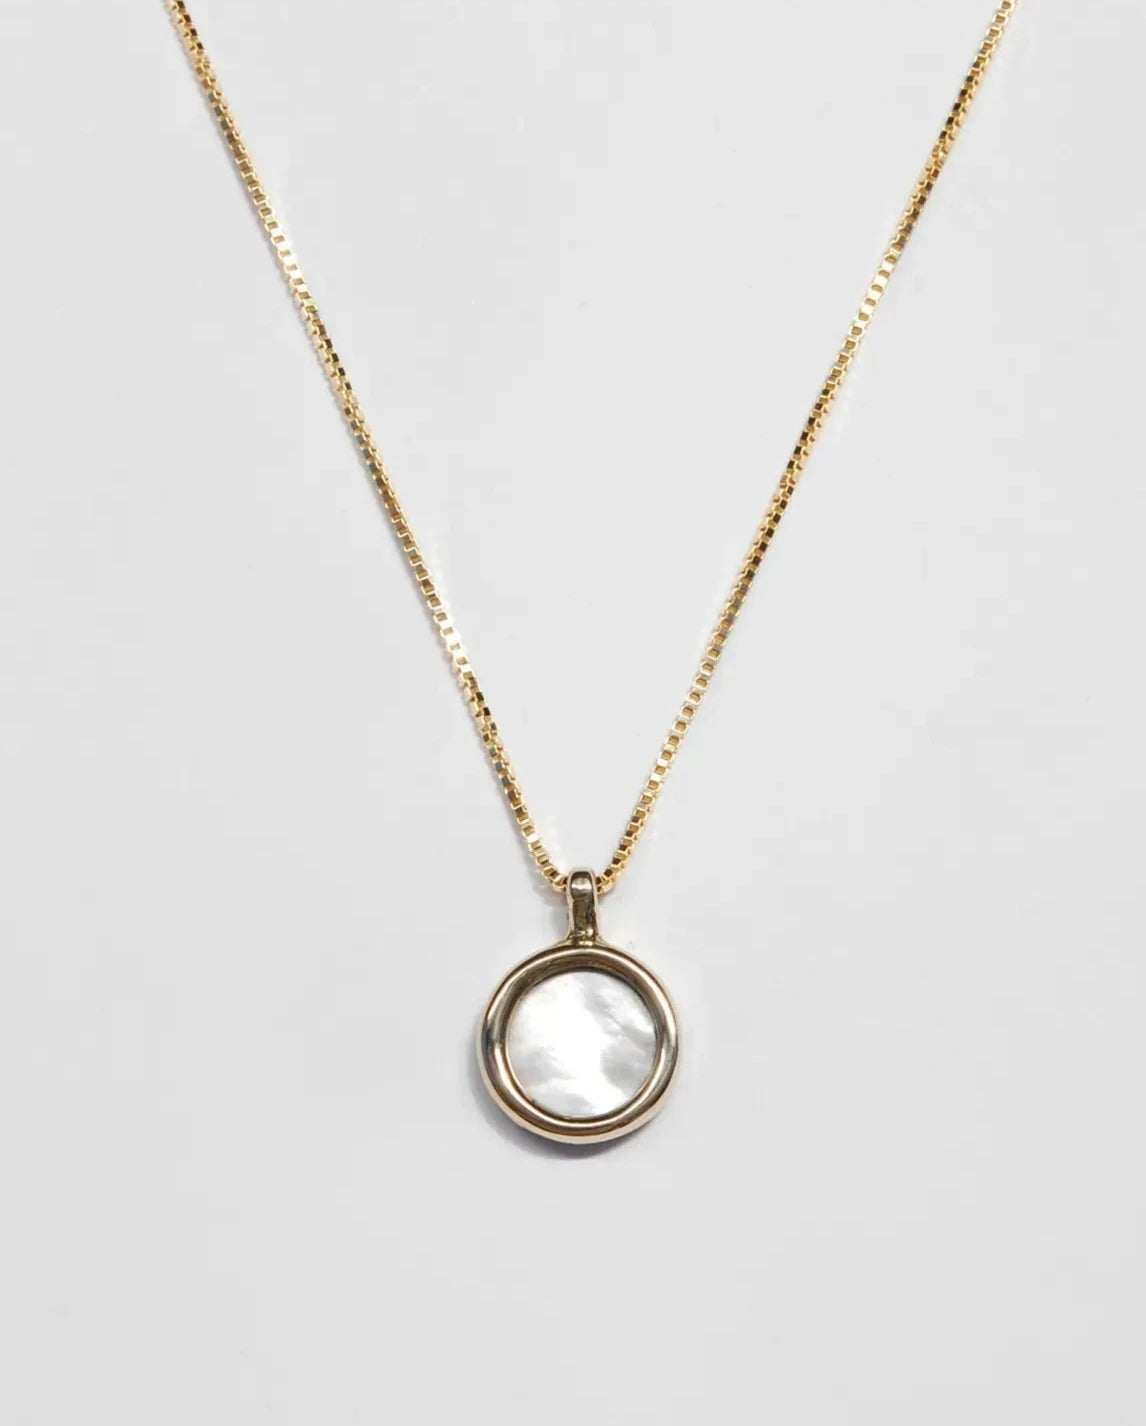 mare necklace - mother of pearl